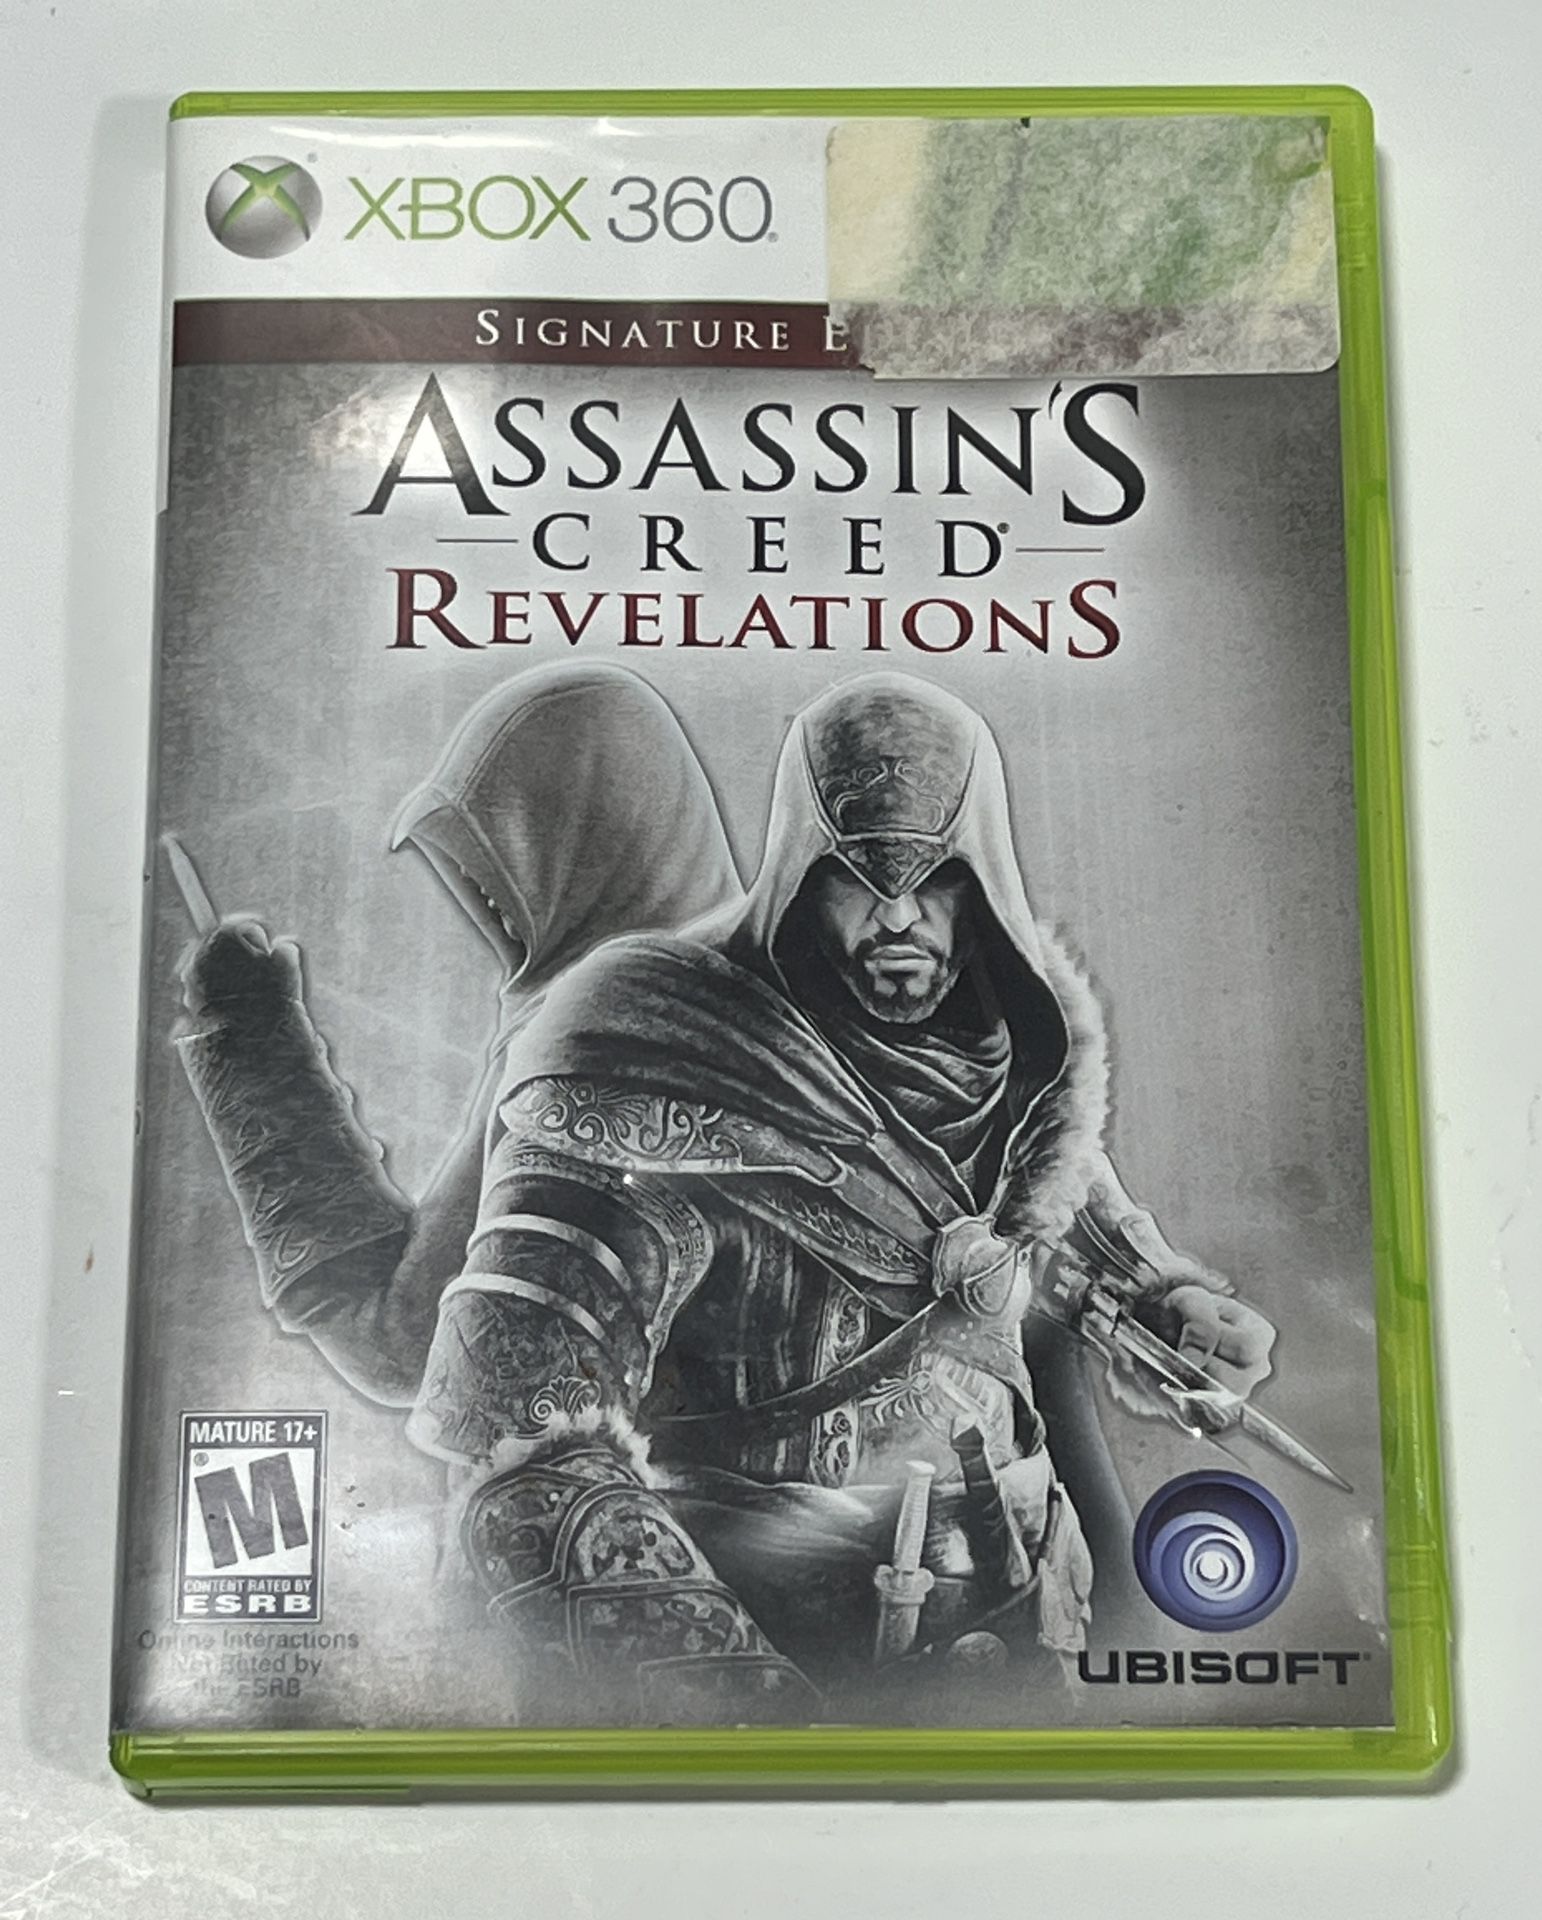 Assassin's Creed Revelations Xbox 360 Game